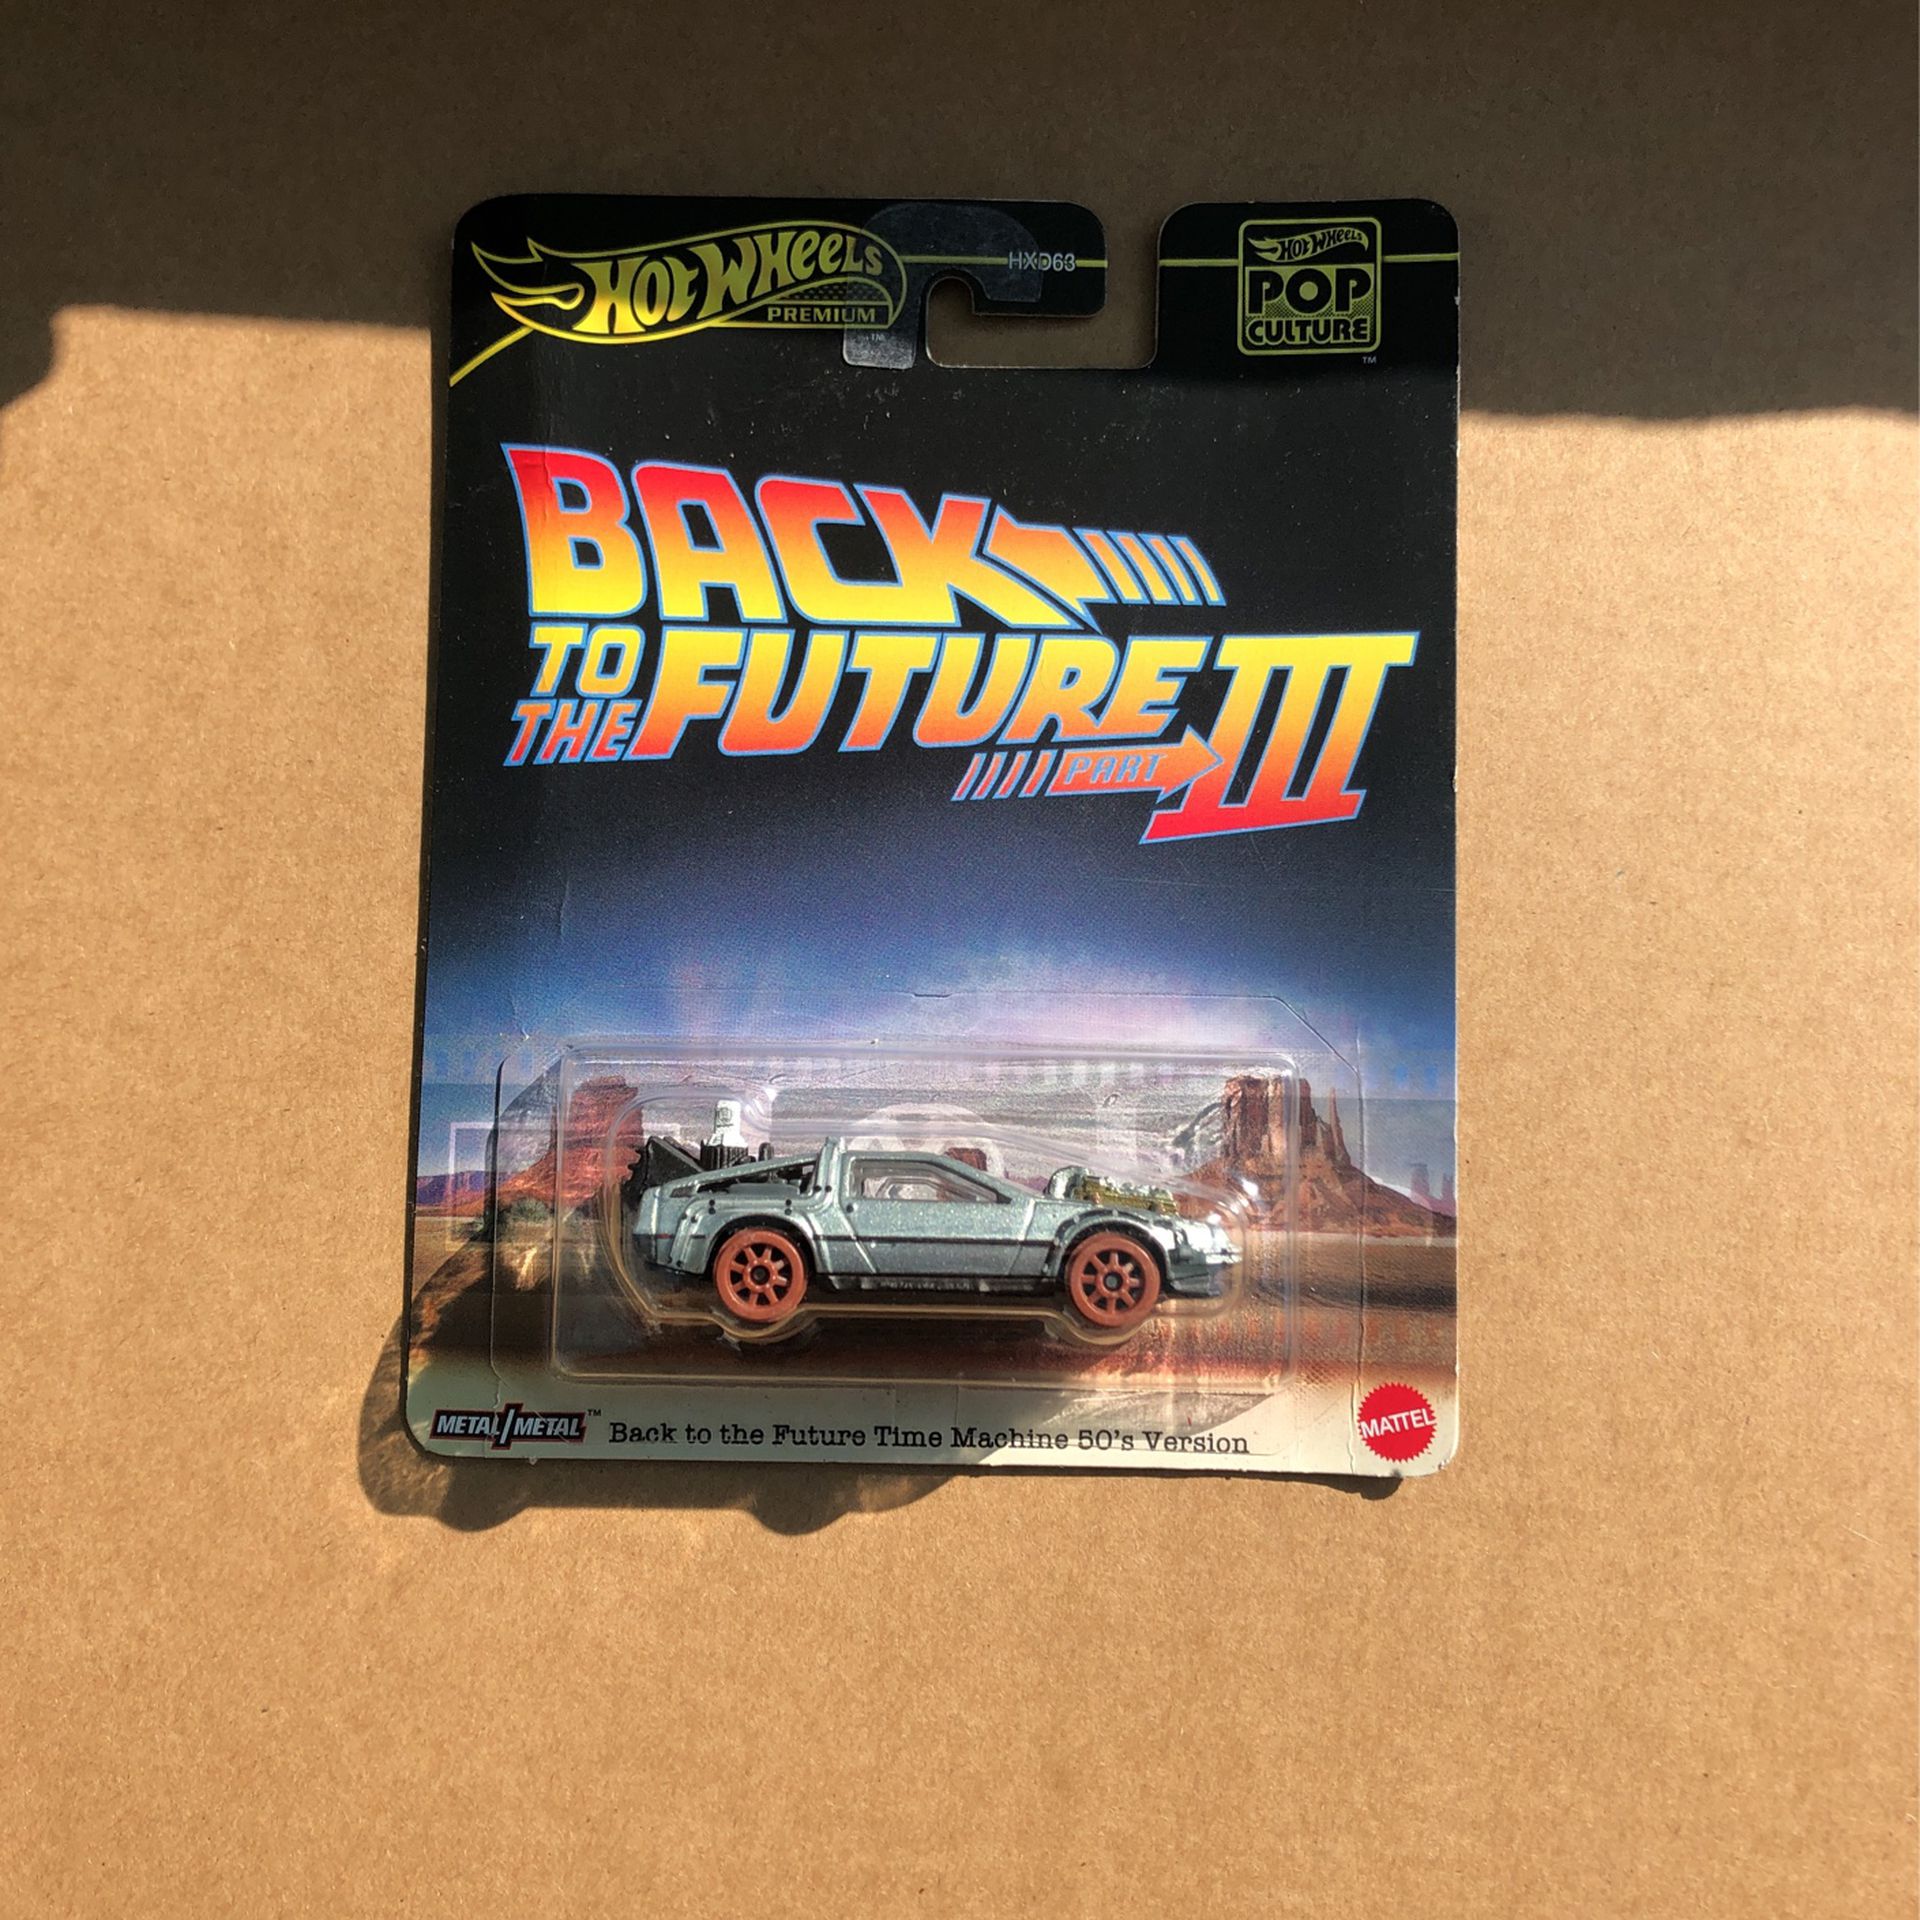 Back to The Future PT.3 - Hot Wheels